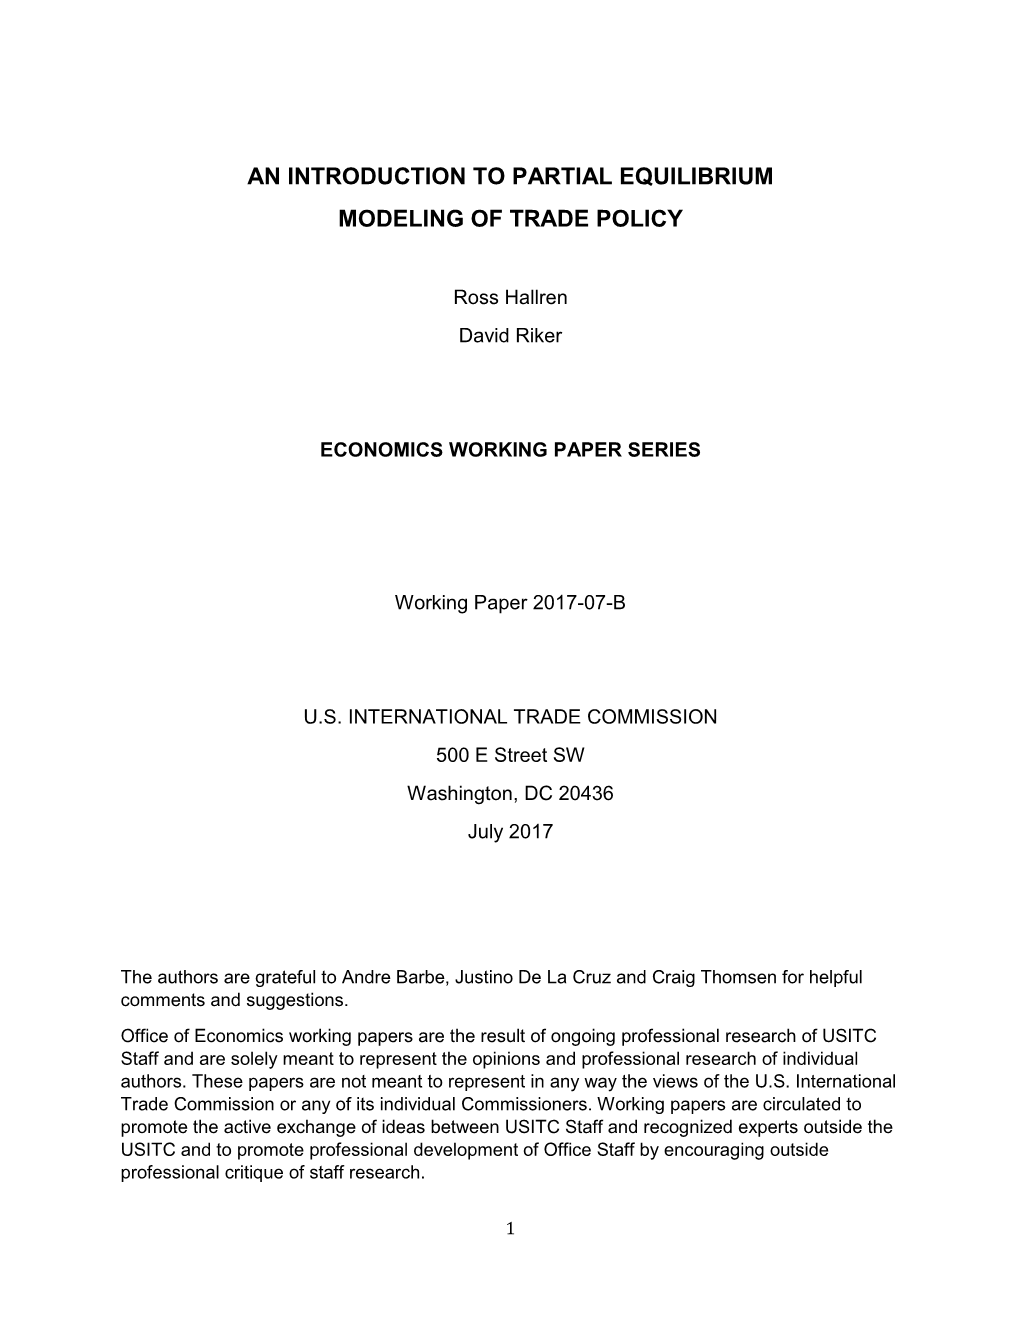 An Introduction to Partial Equilibrium Modeling of Trade Policy